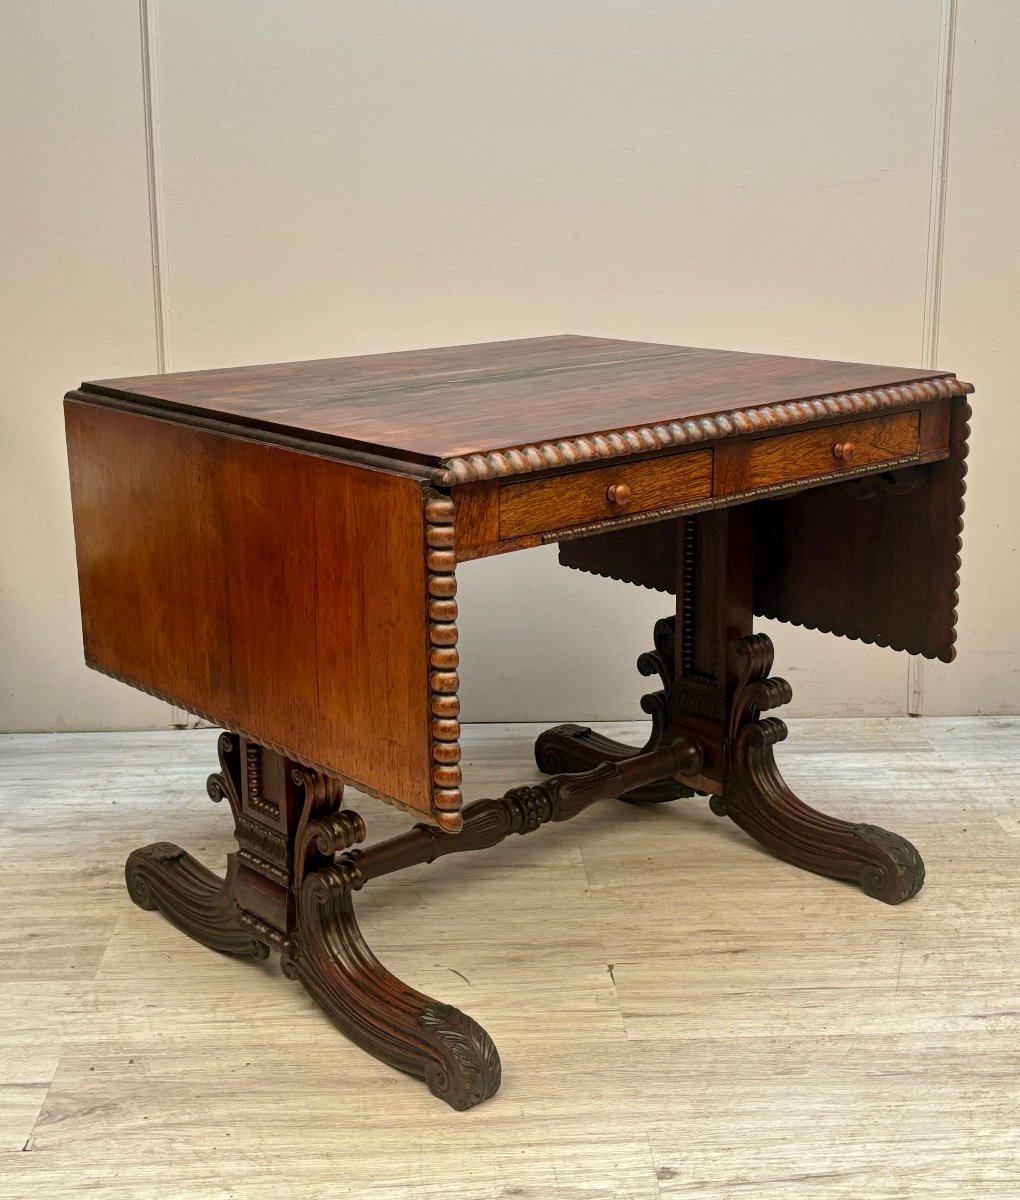 19th Century Rosewood Desk Table 